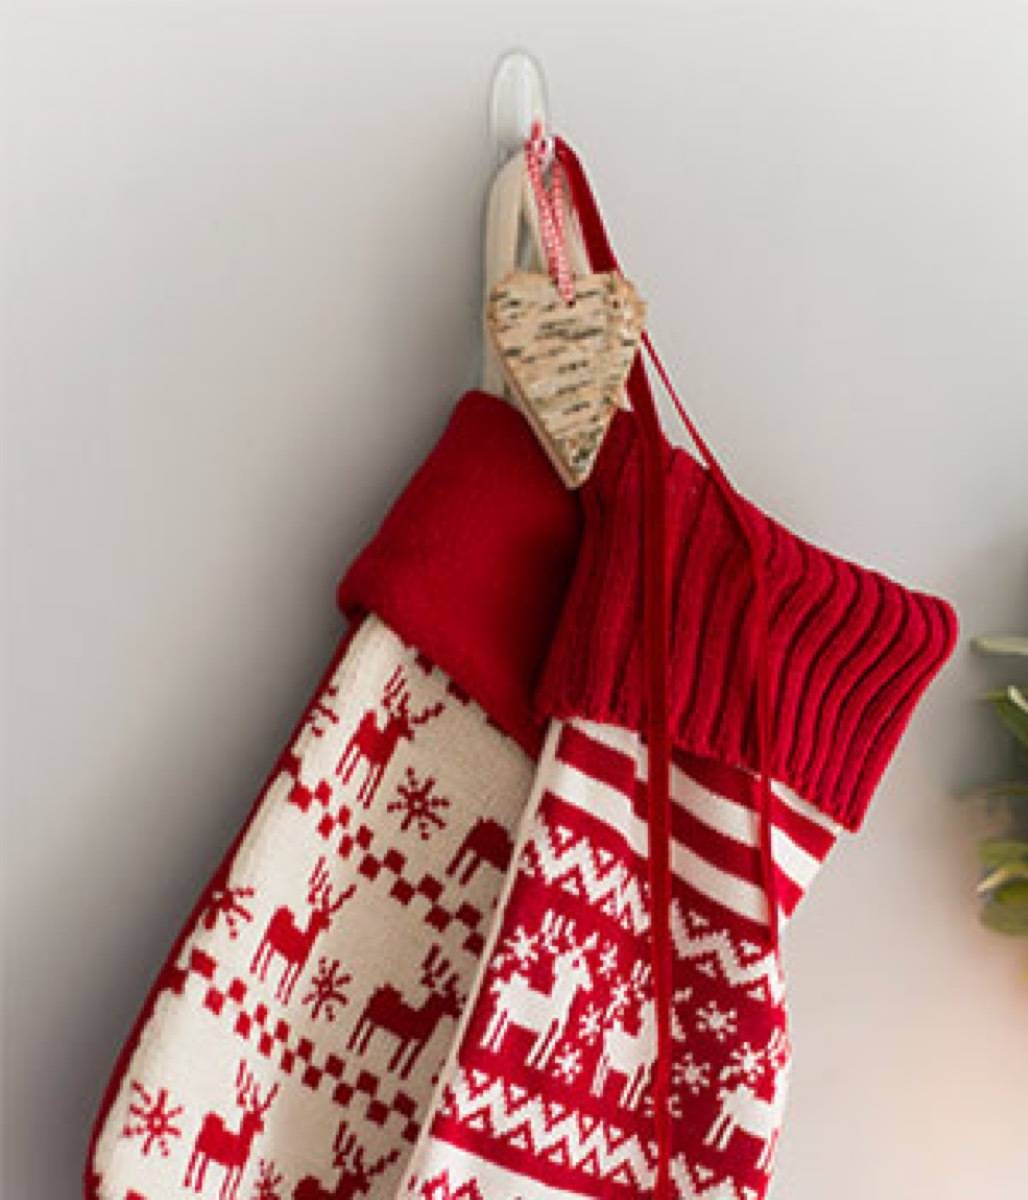 Two red and white mittens are hanging from a wall.